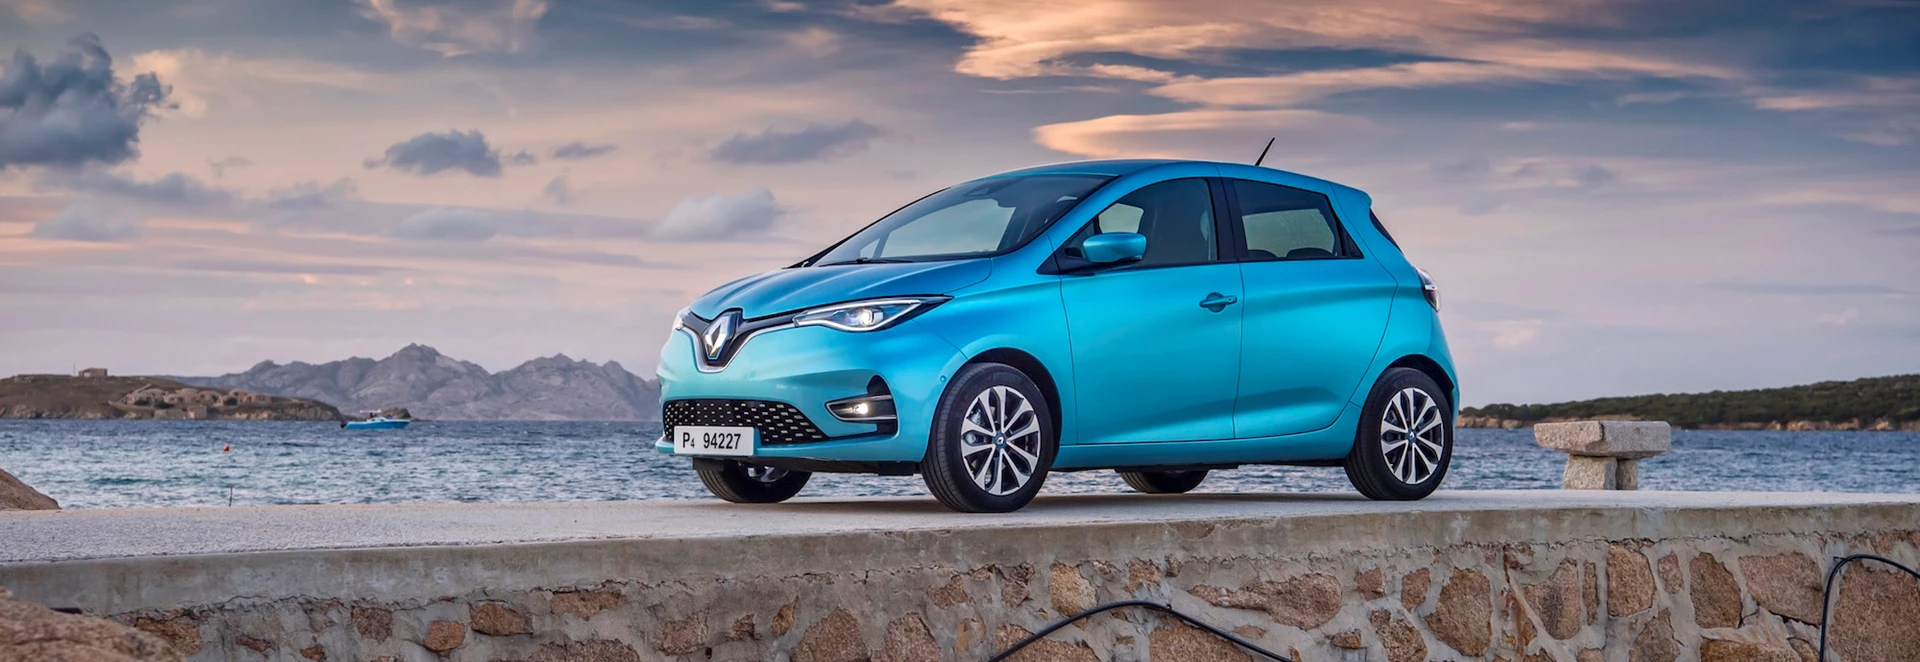 Renault scrappage scheme: how you can save up to £3,000 on a new car